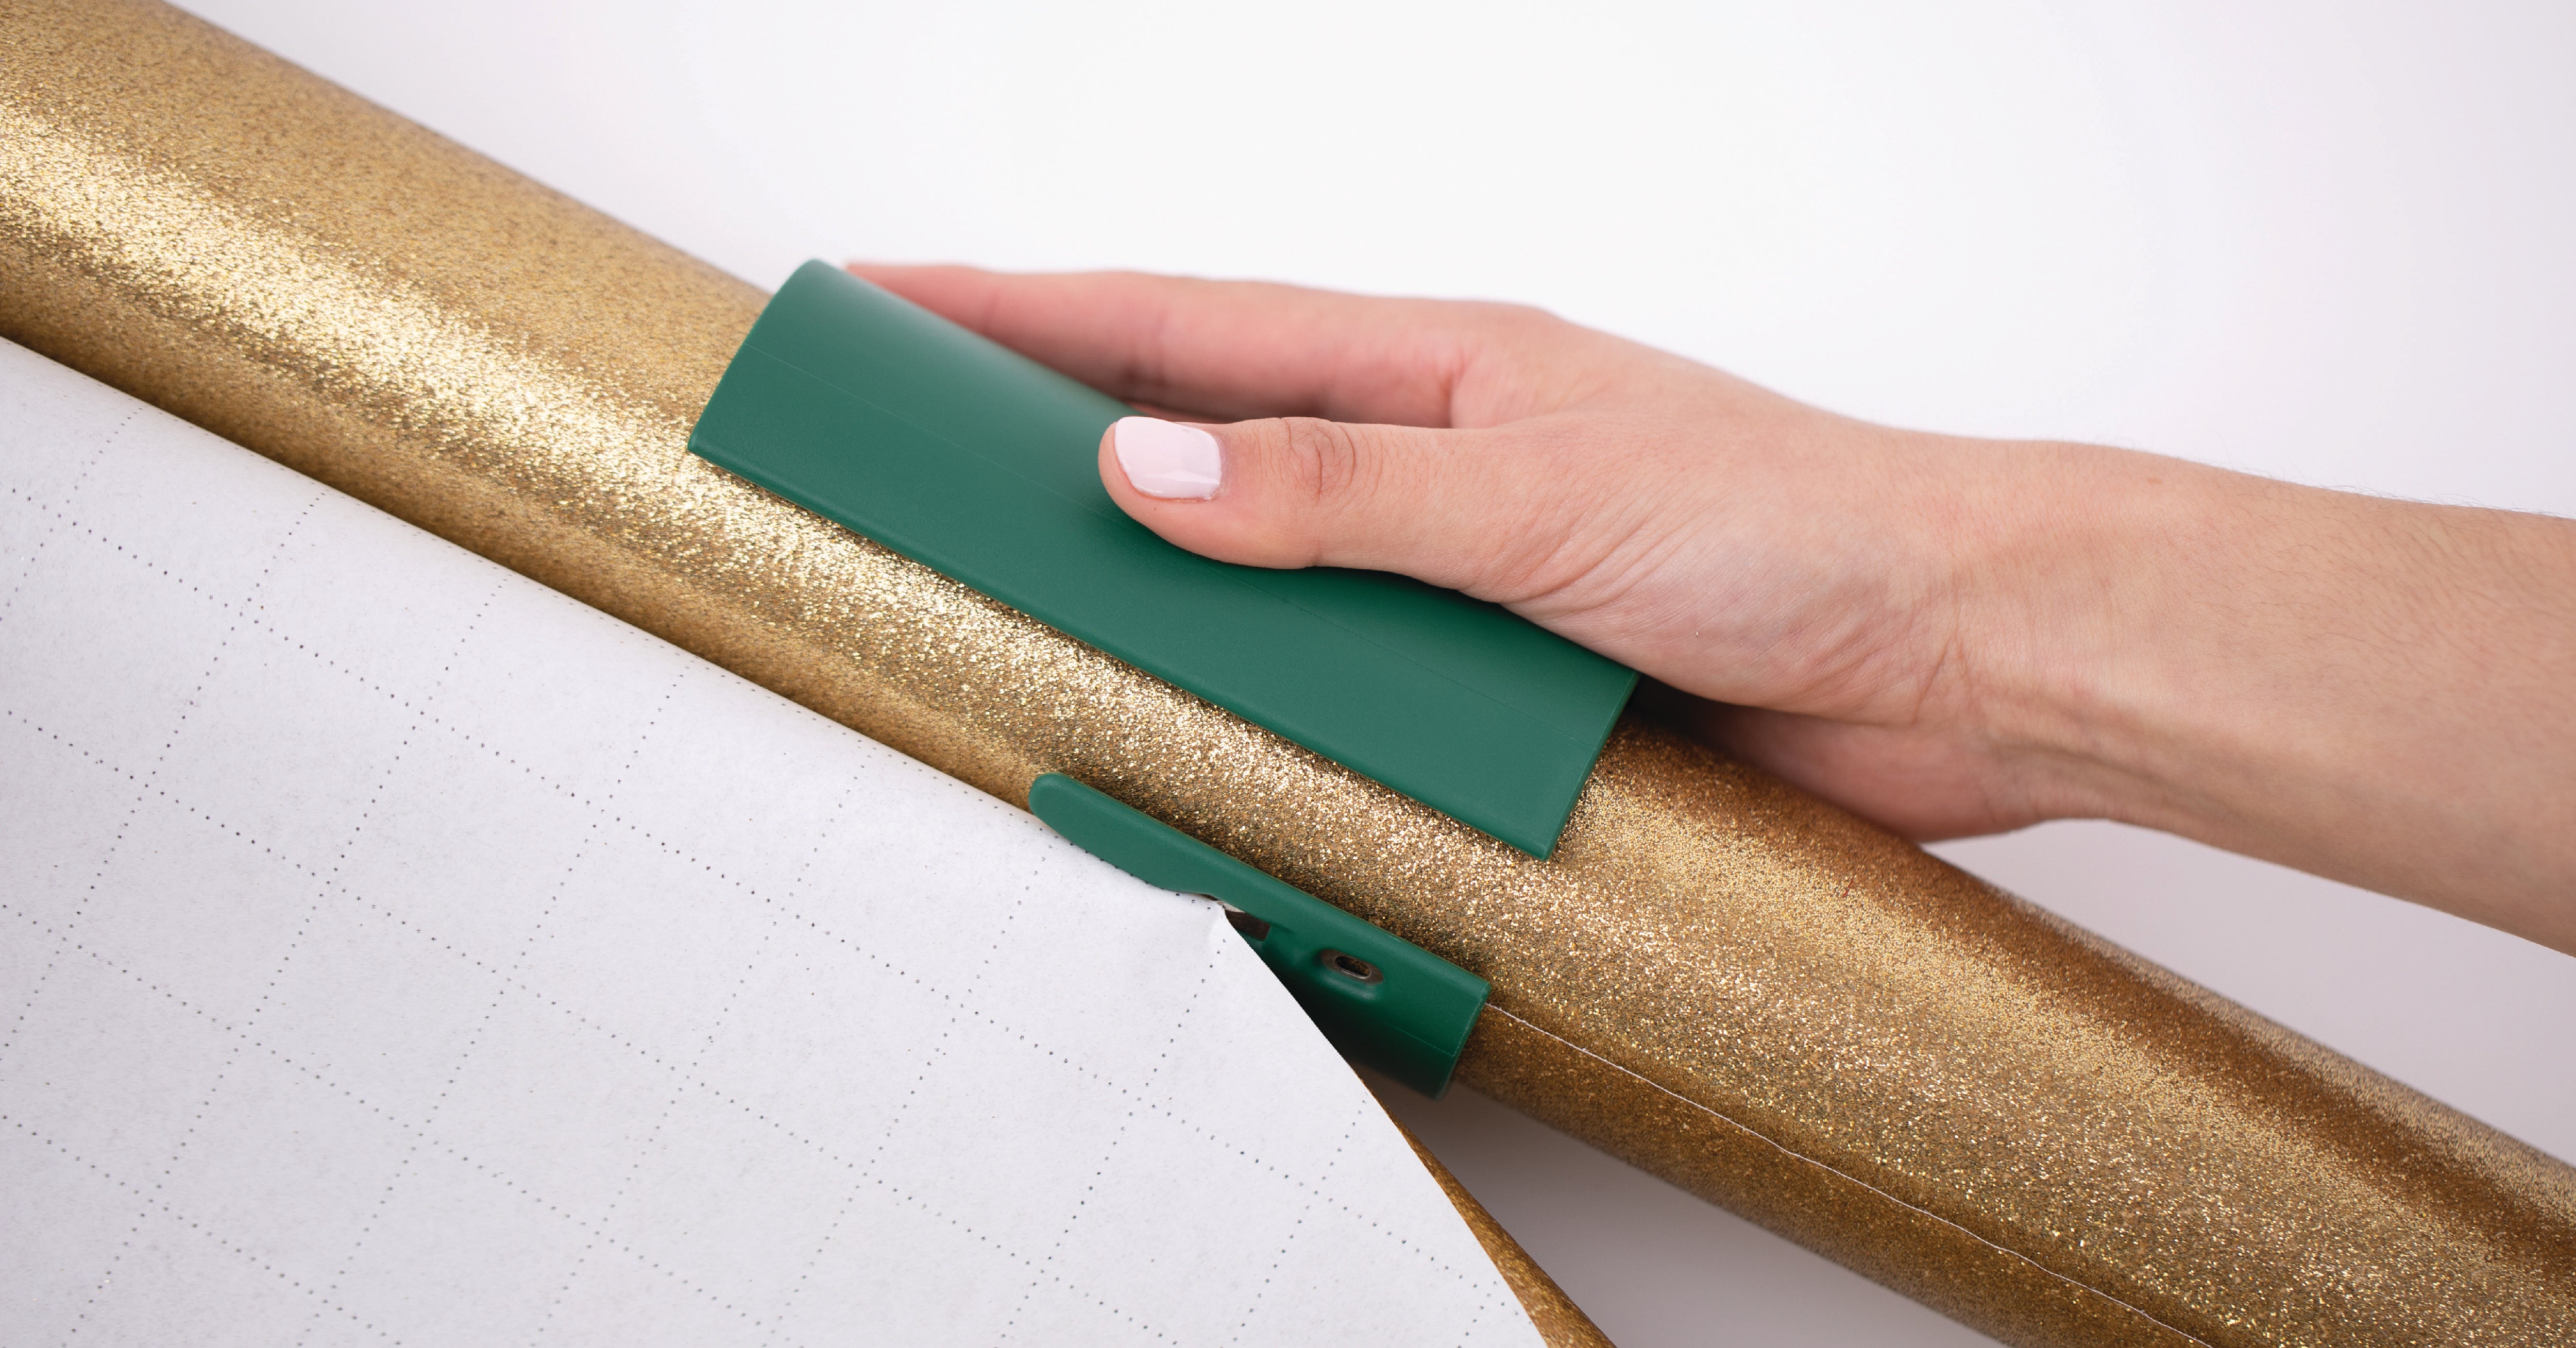 Magic Gift Wrapping Paper Cutter – Christmifis